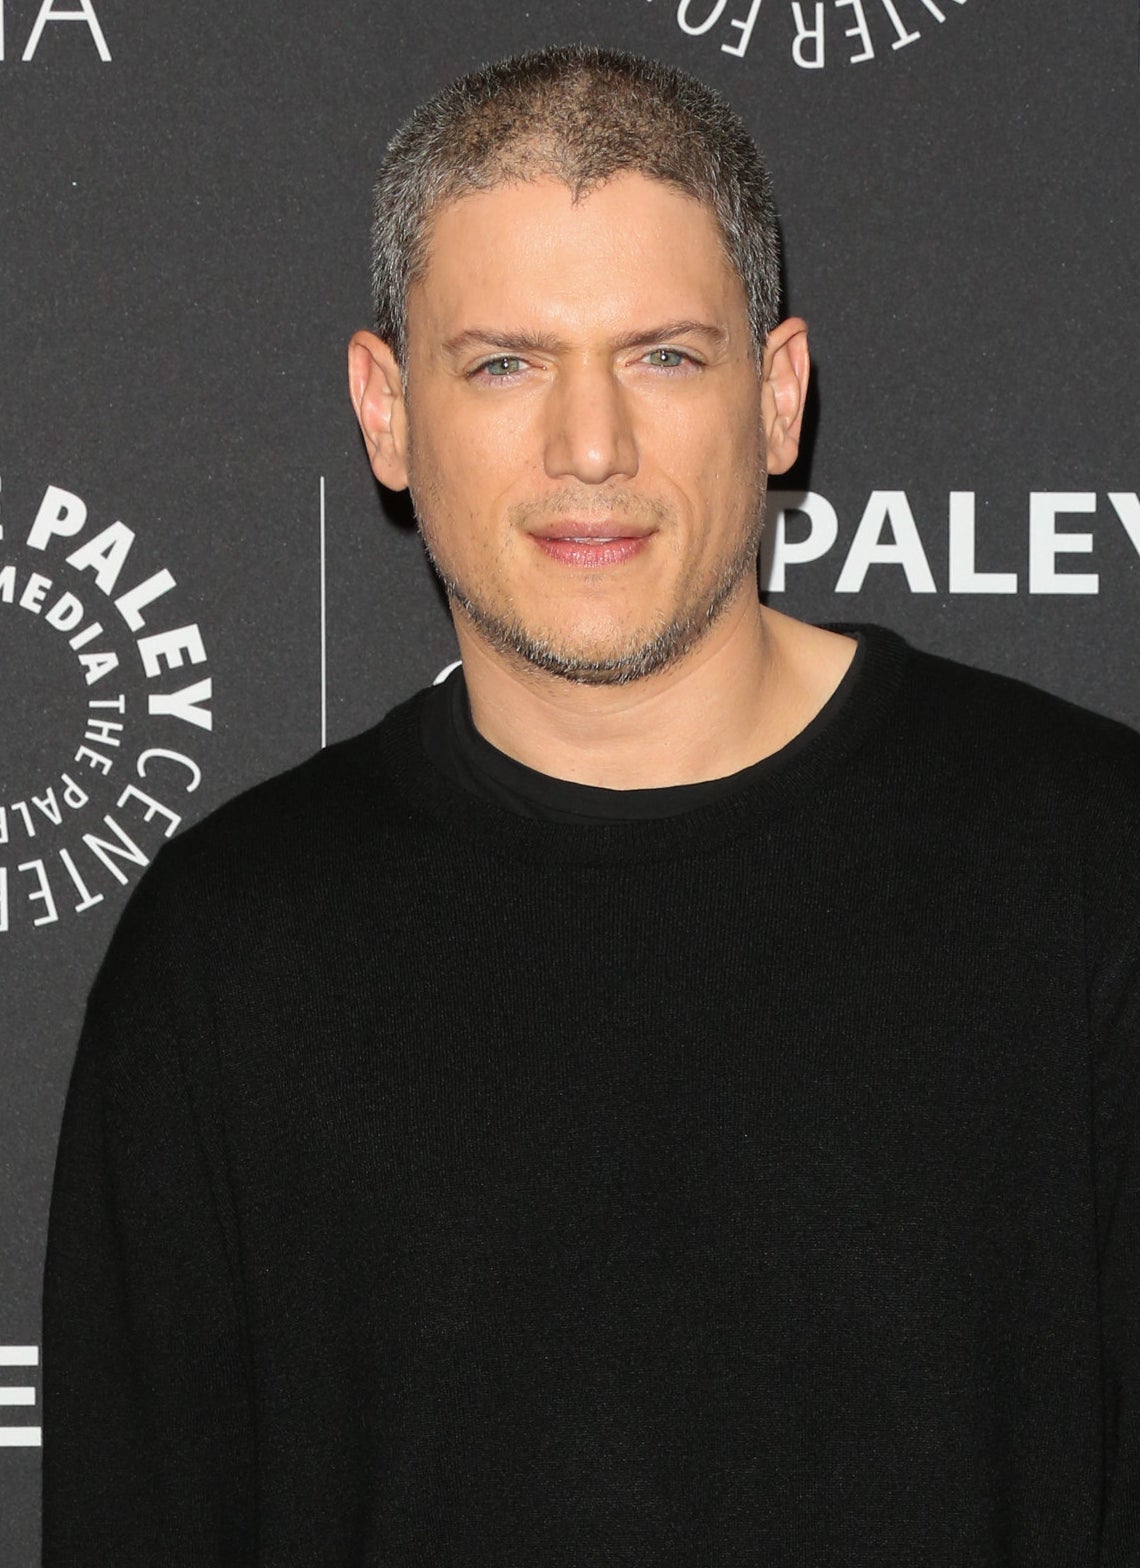 Wentworth Miller at an event